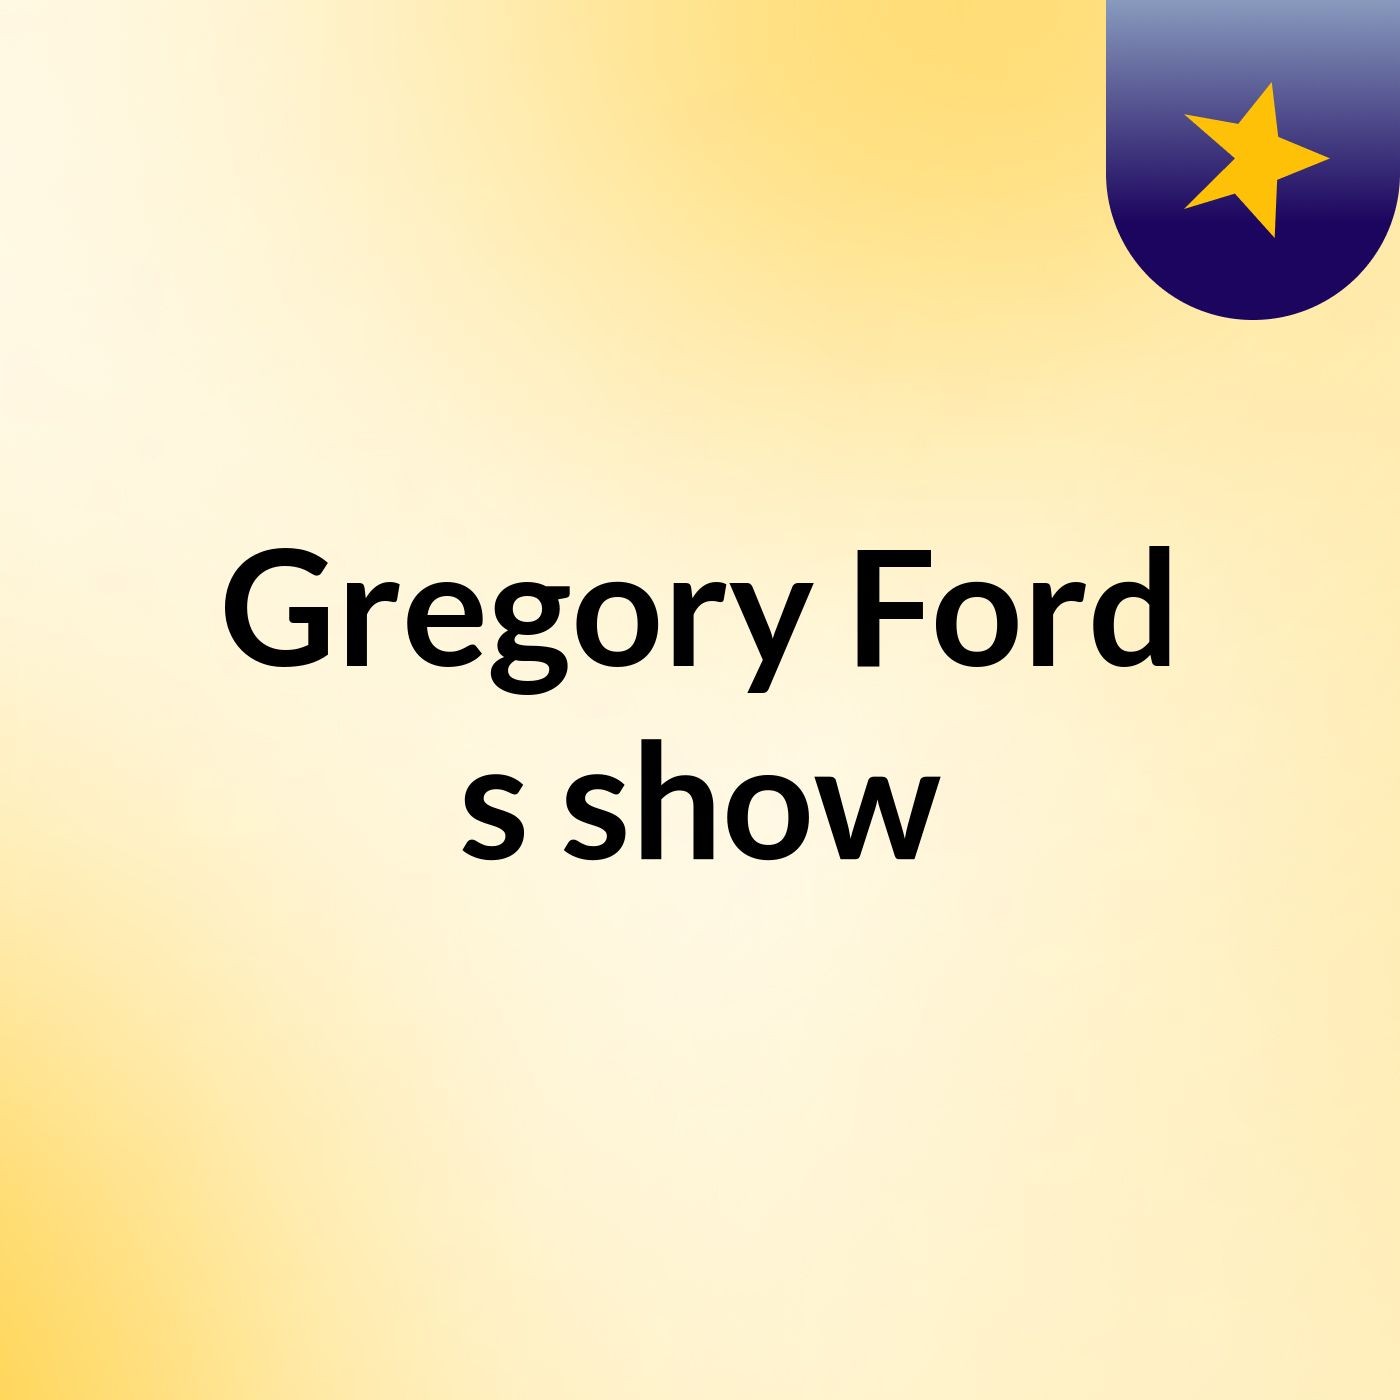 Episode 18 - Gregory Ford's show